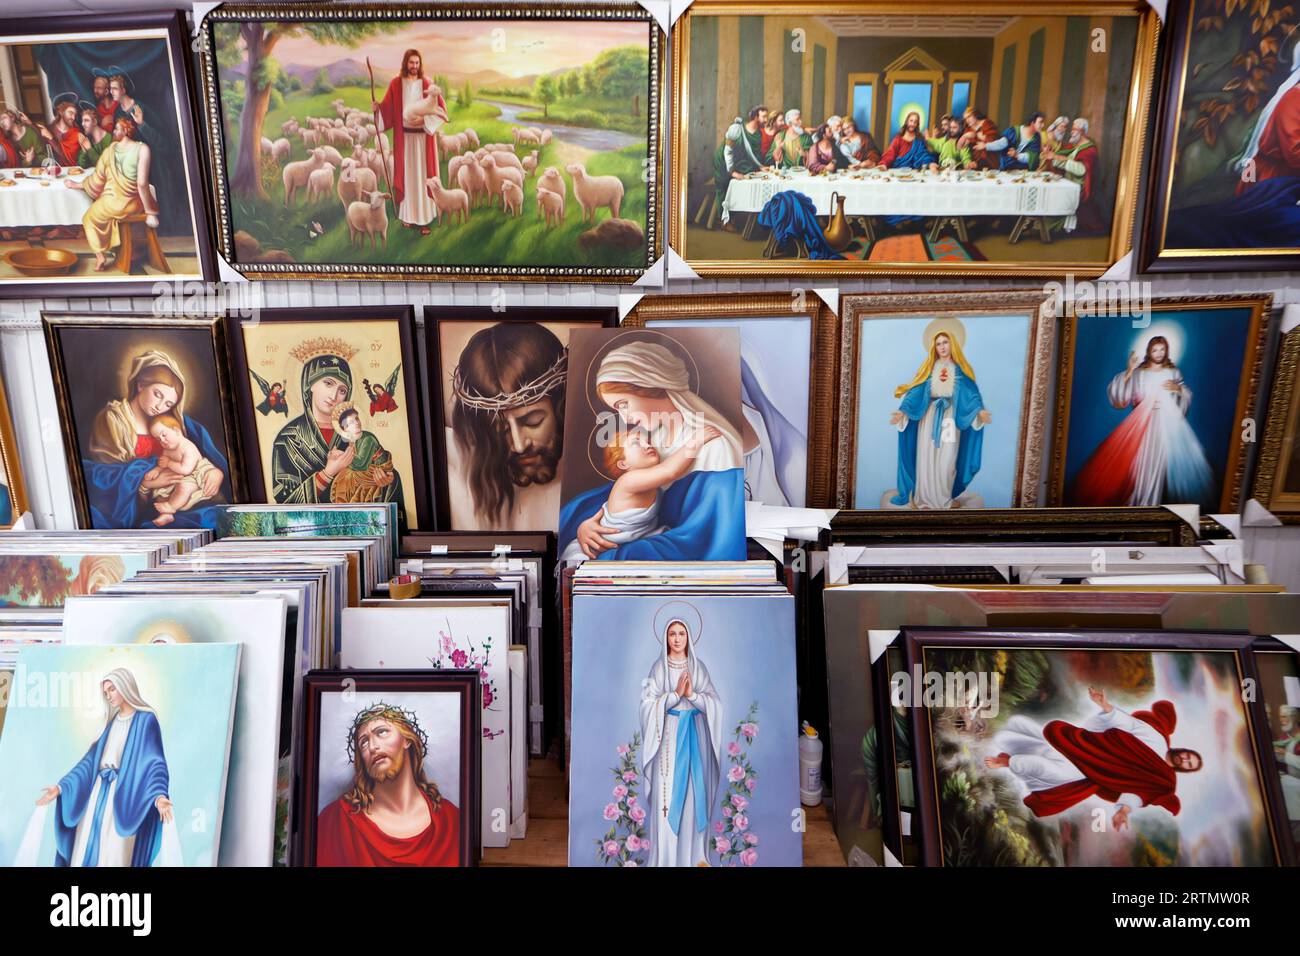 Fatima Church. A shop selling Christian merchandise. Images of Jesus and Mary;  Ho Chi Minh city. Vietnam. Stock Photo